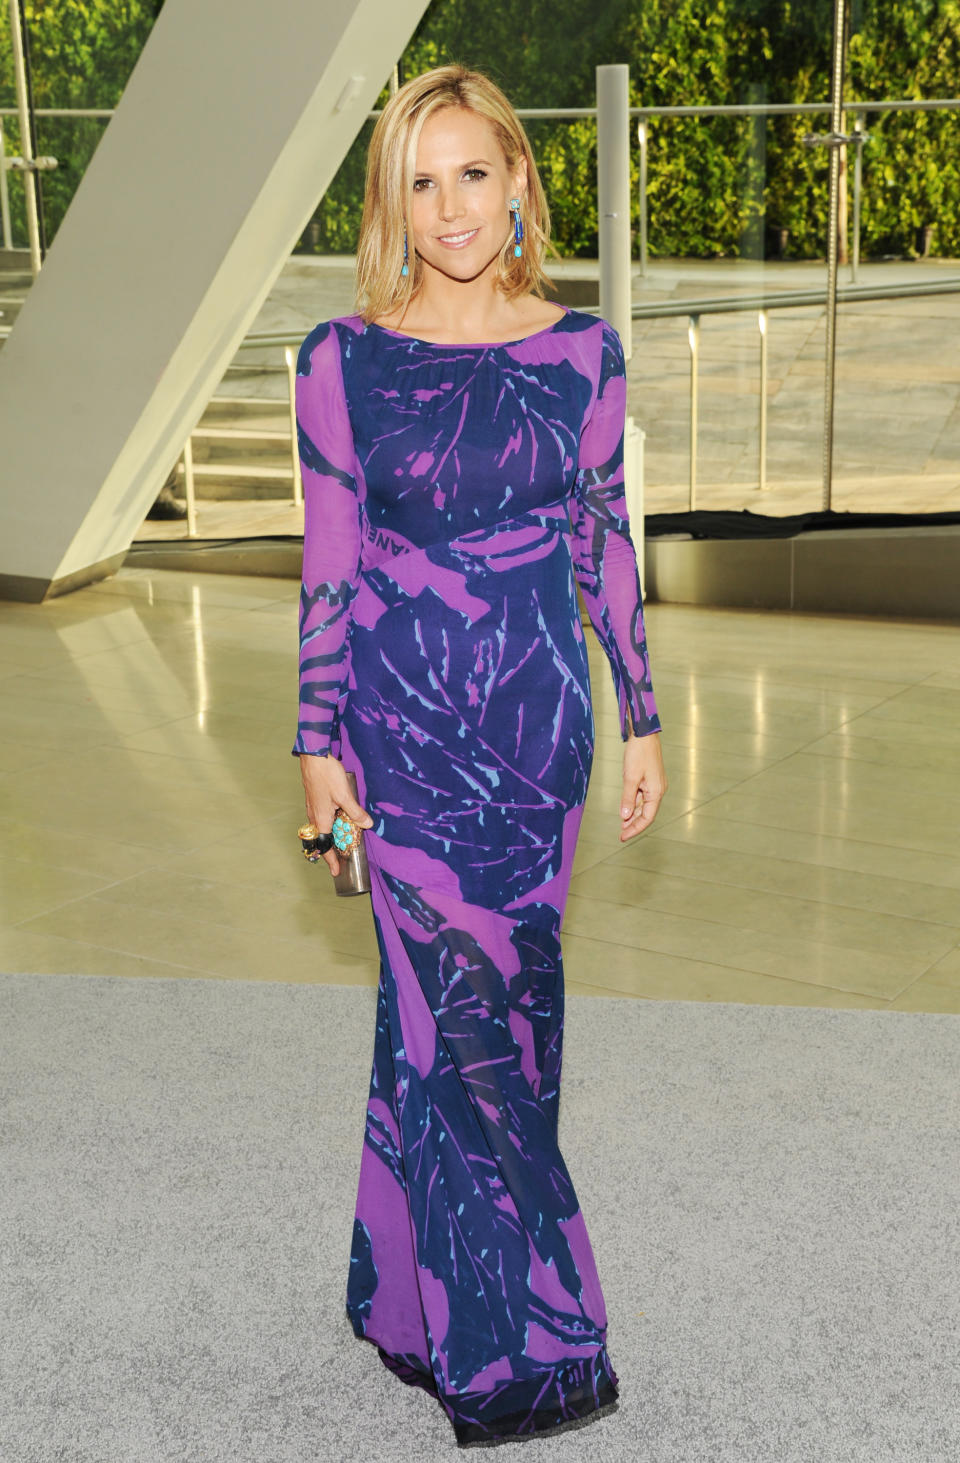 Designer Tory Burch attends the 2013 CFDA Fashion Awards at Alice Tully Hall on Monday, June 3, 2013 in New York. (Photo by Evan Agostini/Invision/AP)